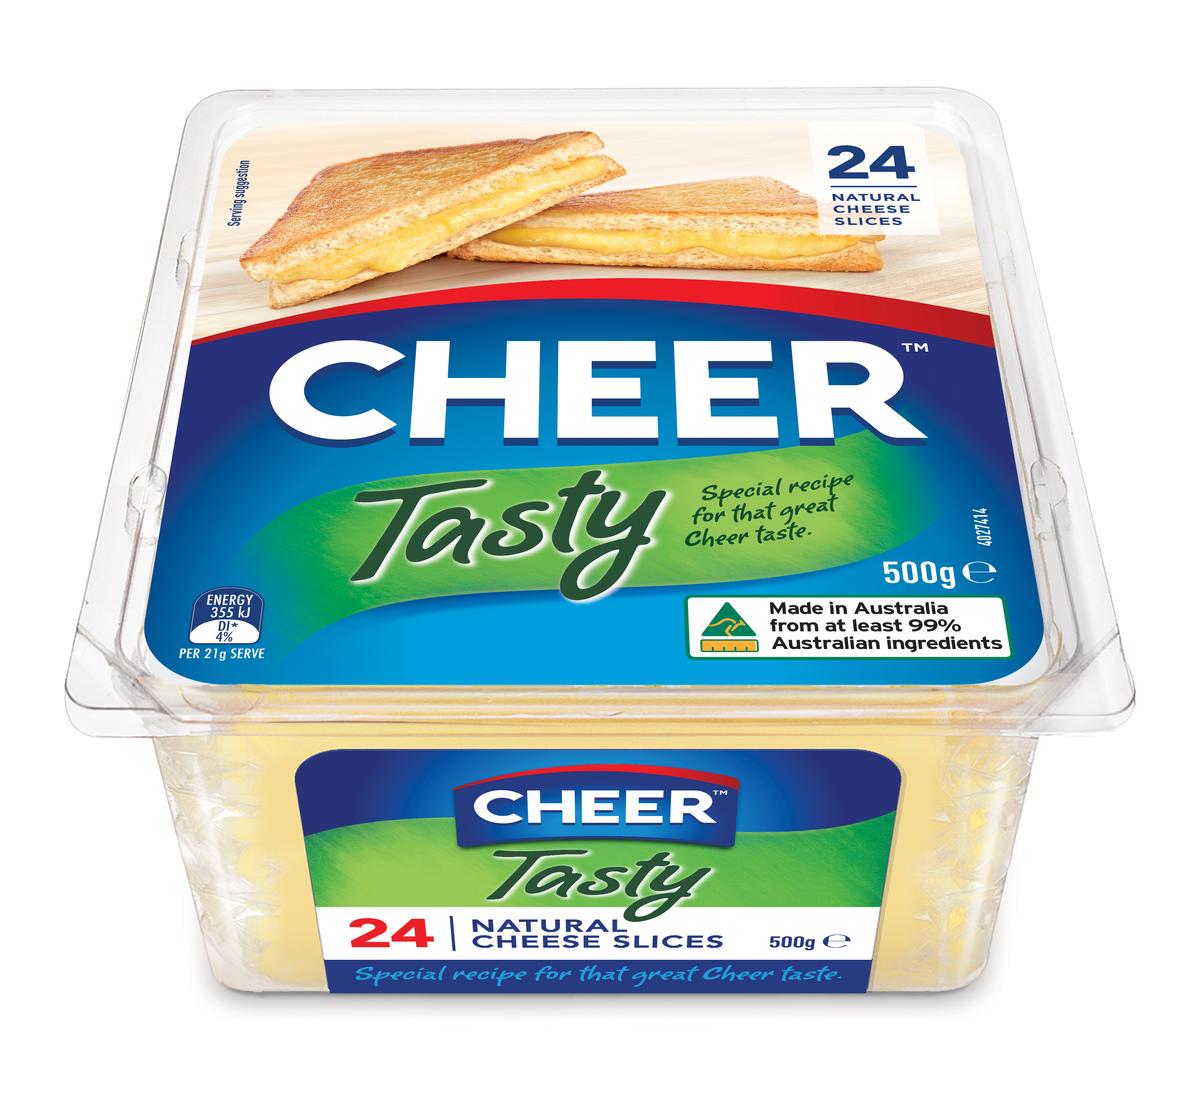 Coon Cheese Rebrands as Cheer Following Pressure by Activist